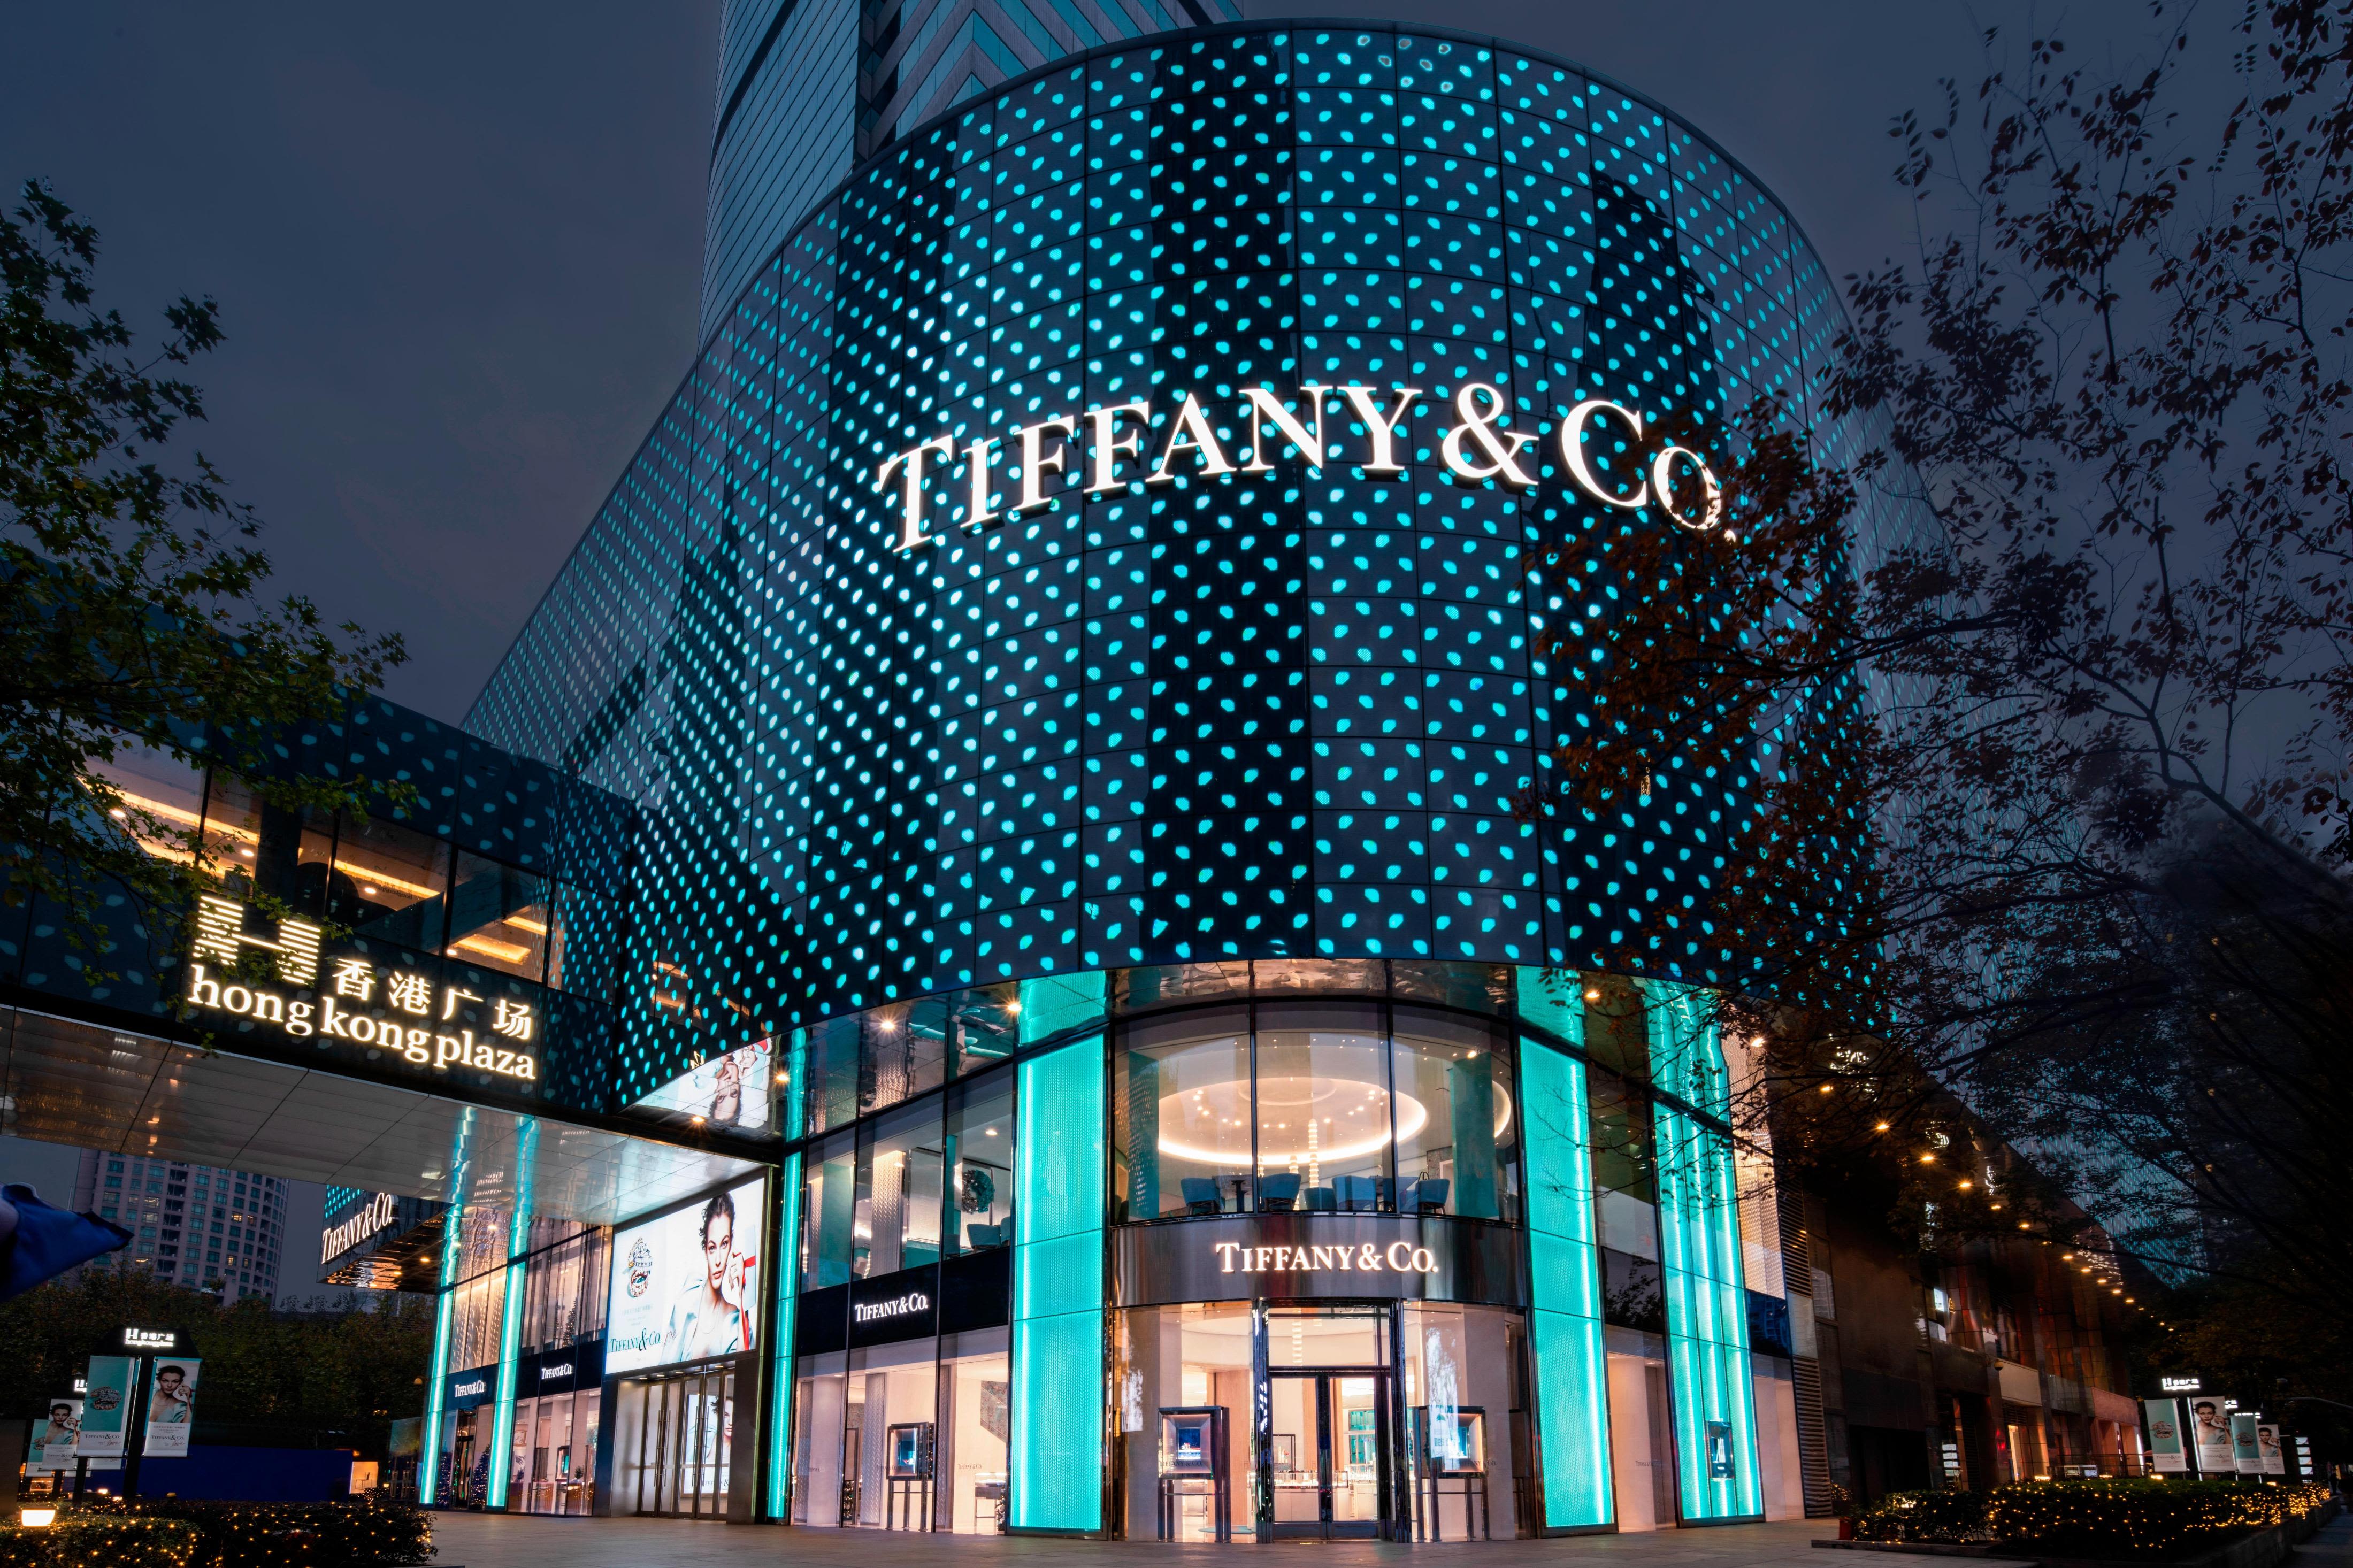 Tiffany Returns to the Center of Conversation Among Chinese Millennials,  But Can This Last?